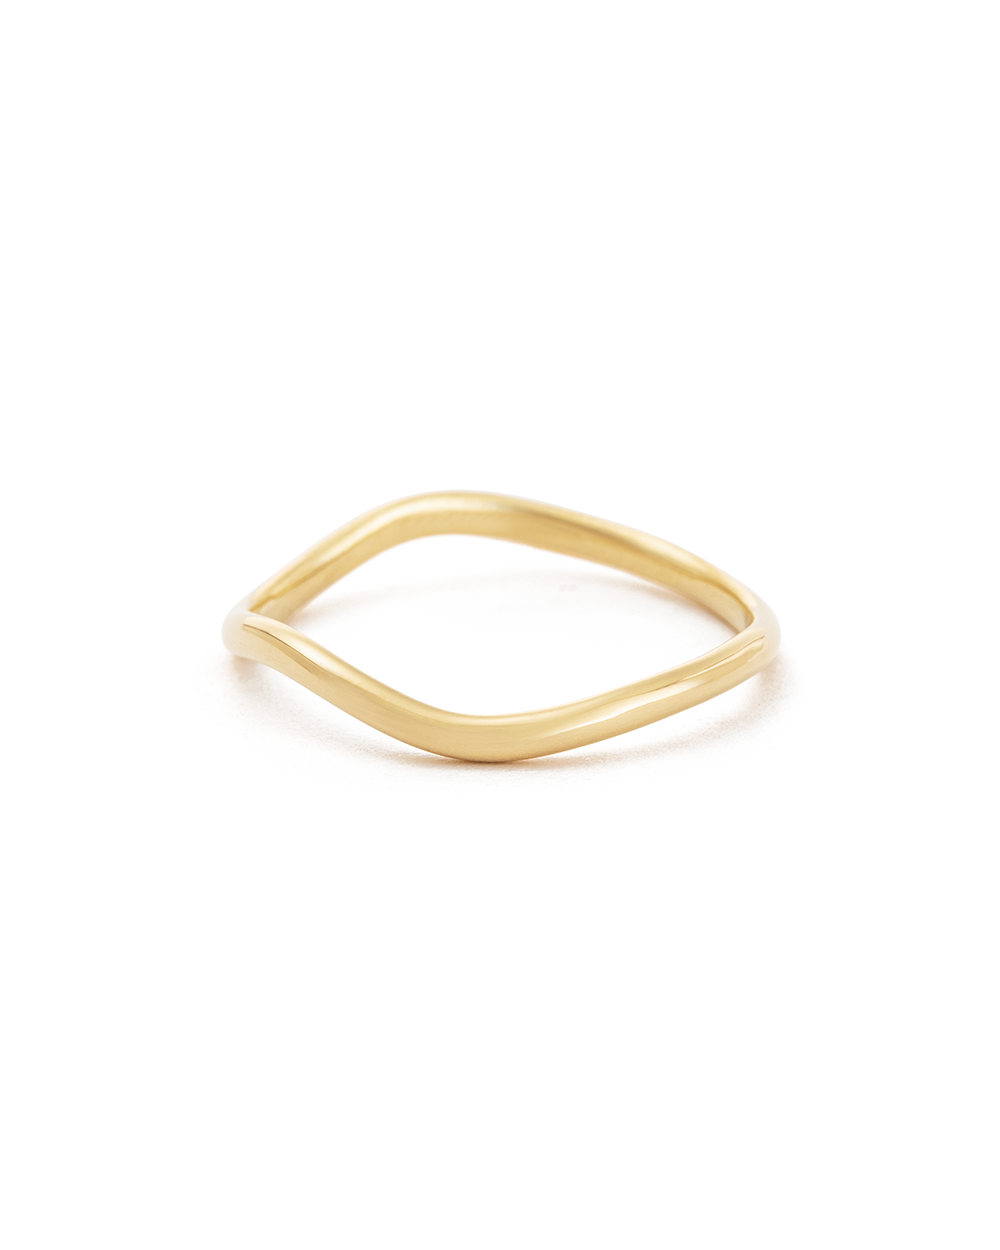 VACATION STACKING RING (18K GOLD VERMEIL)